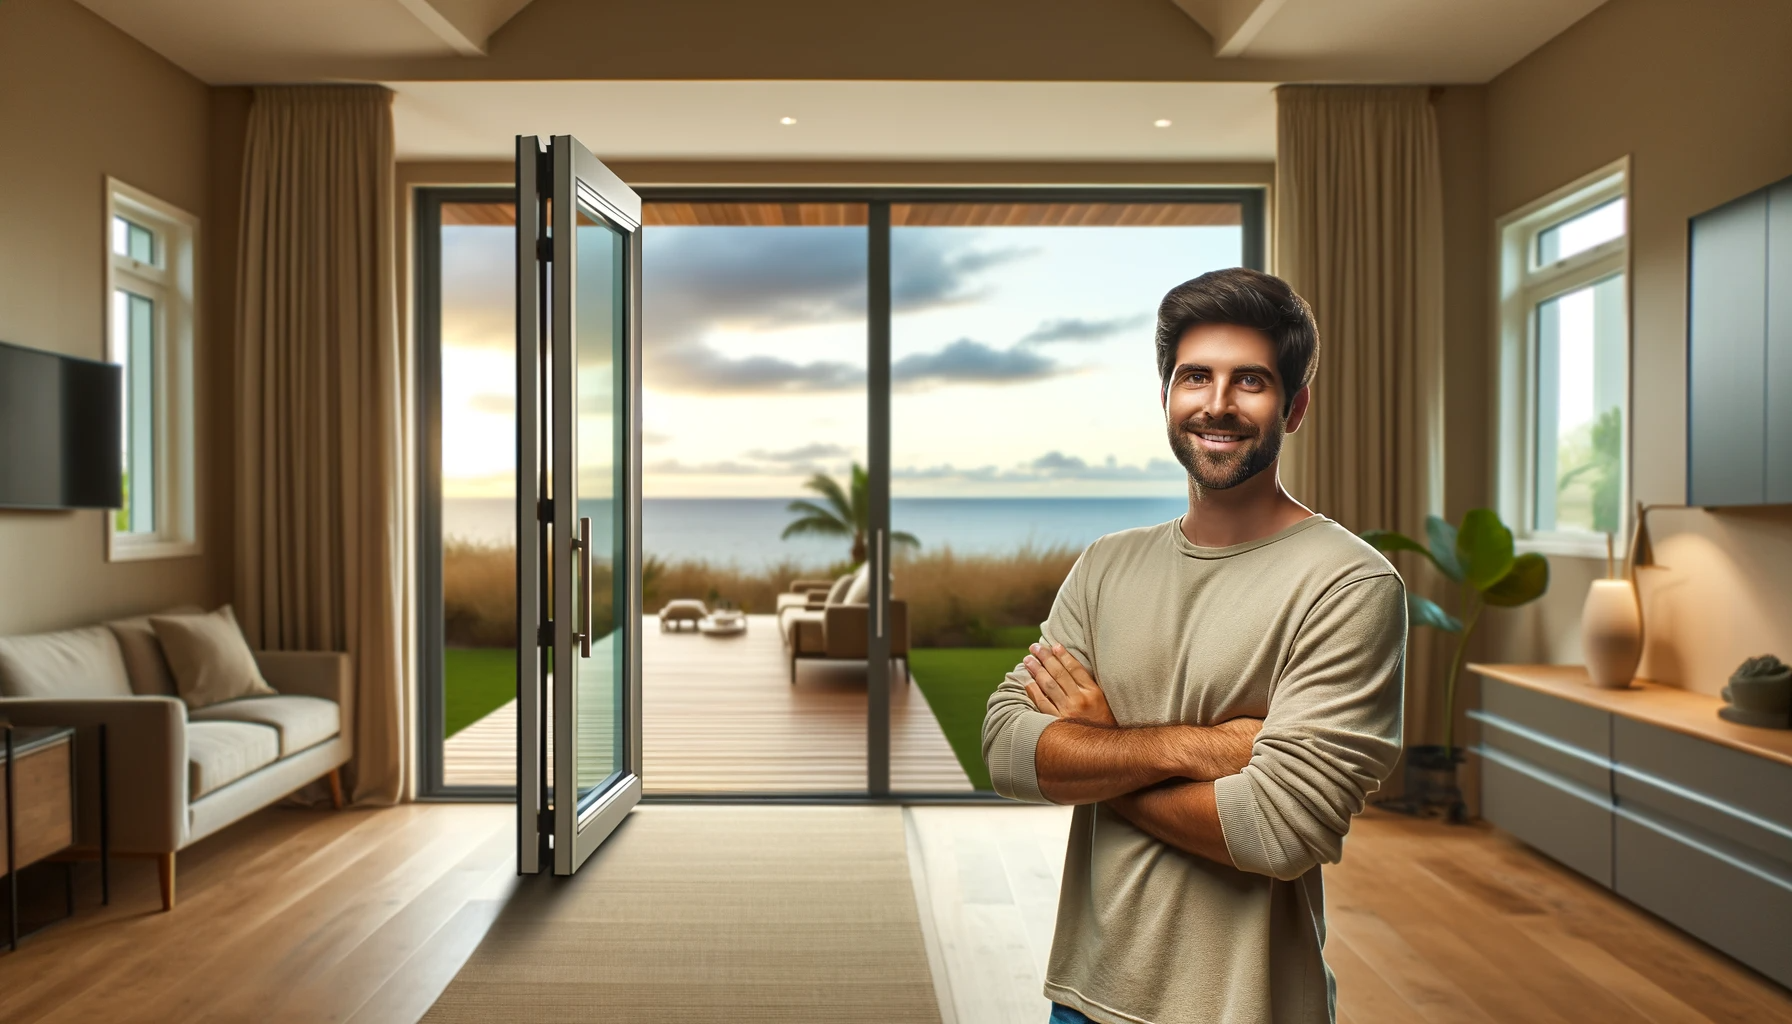 DALL·E 2024-01-02 15.24.09 - A wide landscape image of a homeowner of diverse descent looking happy and content with his decision to purchase impact doors for his home. The scene 